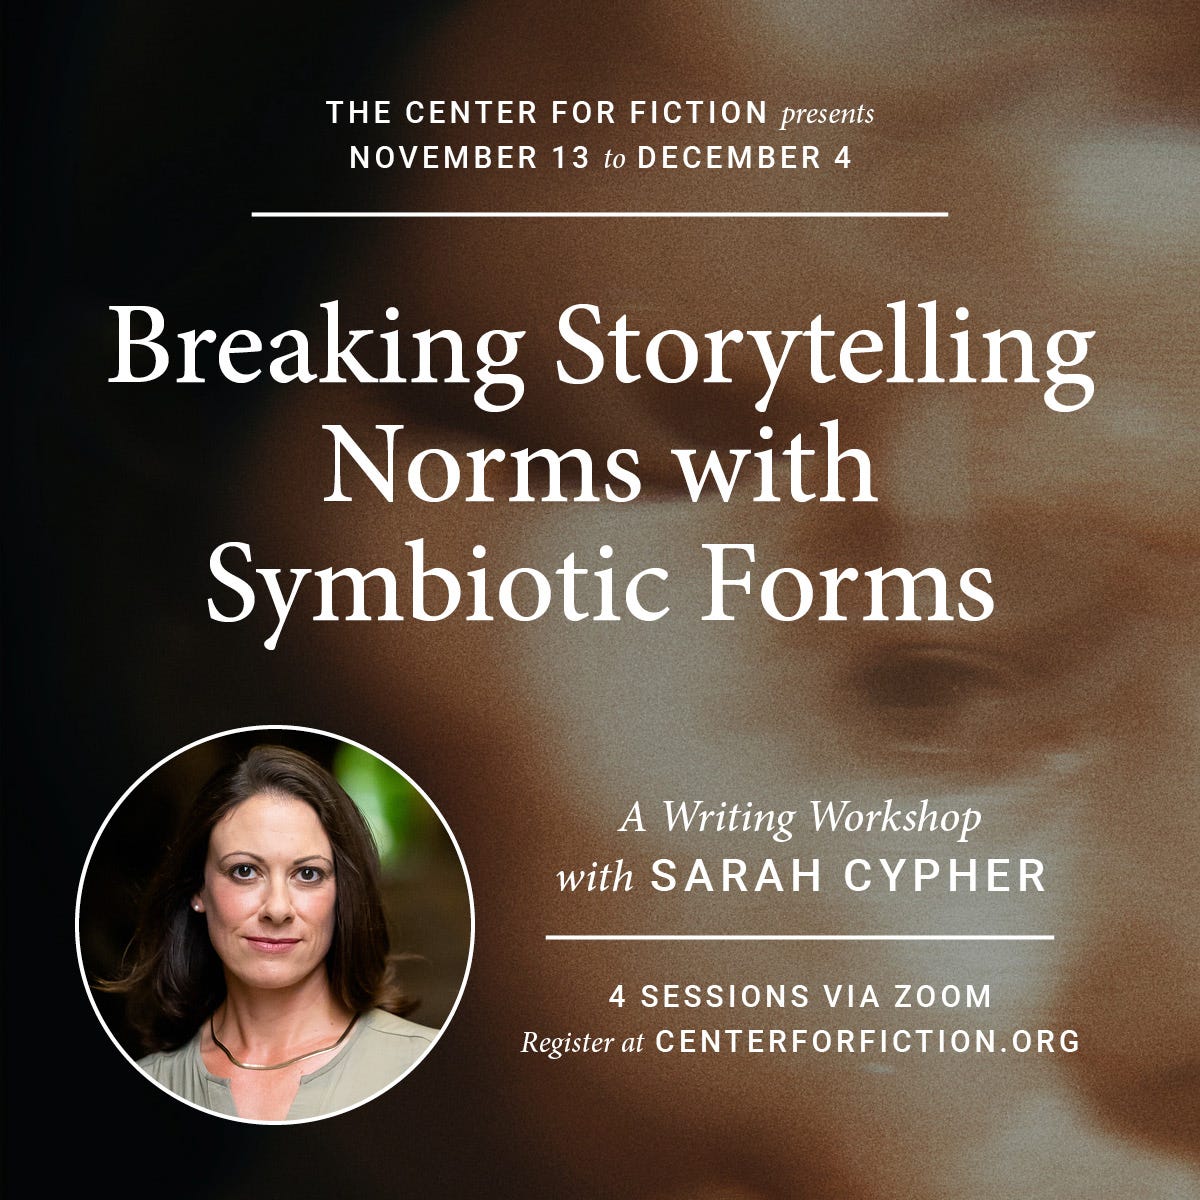 Center for Fiction class graphic advertising "Breaking Storytelling Norms with Symbiotic Forms"